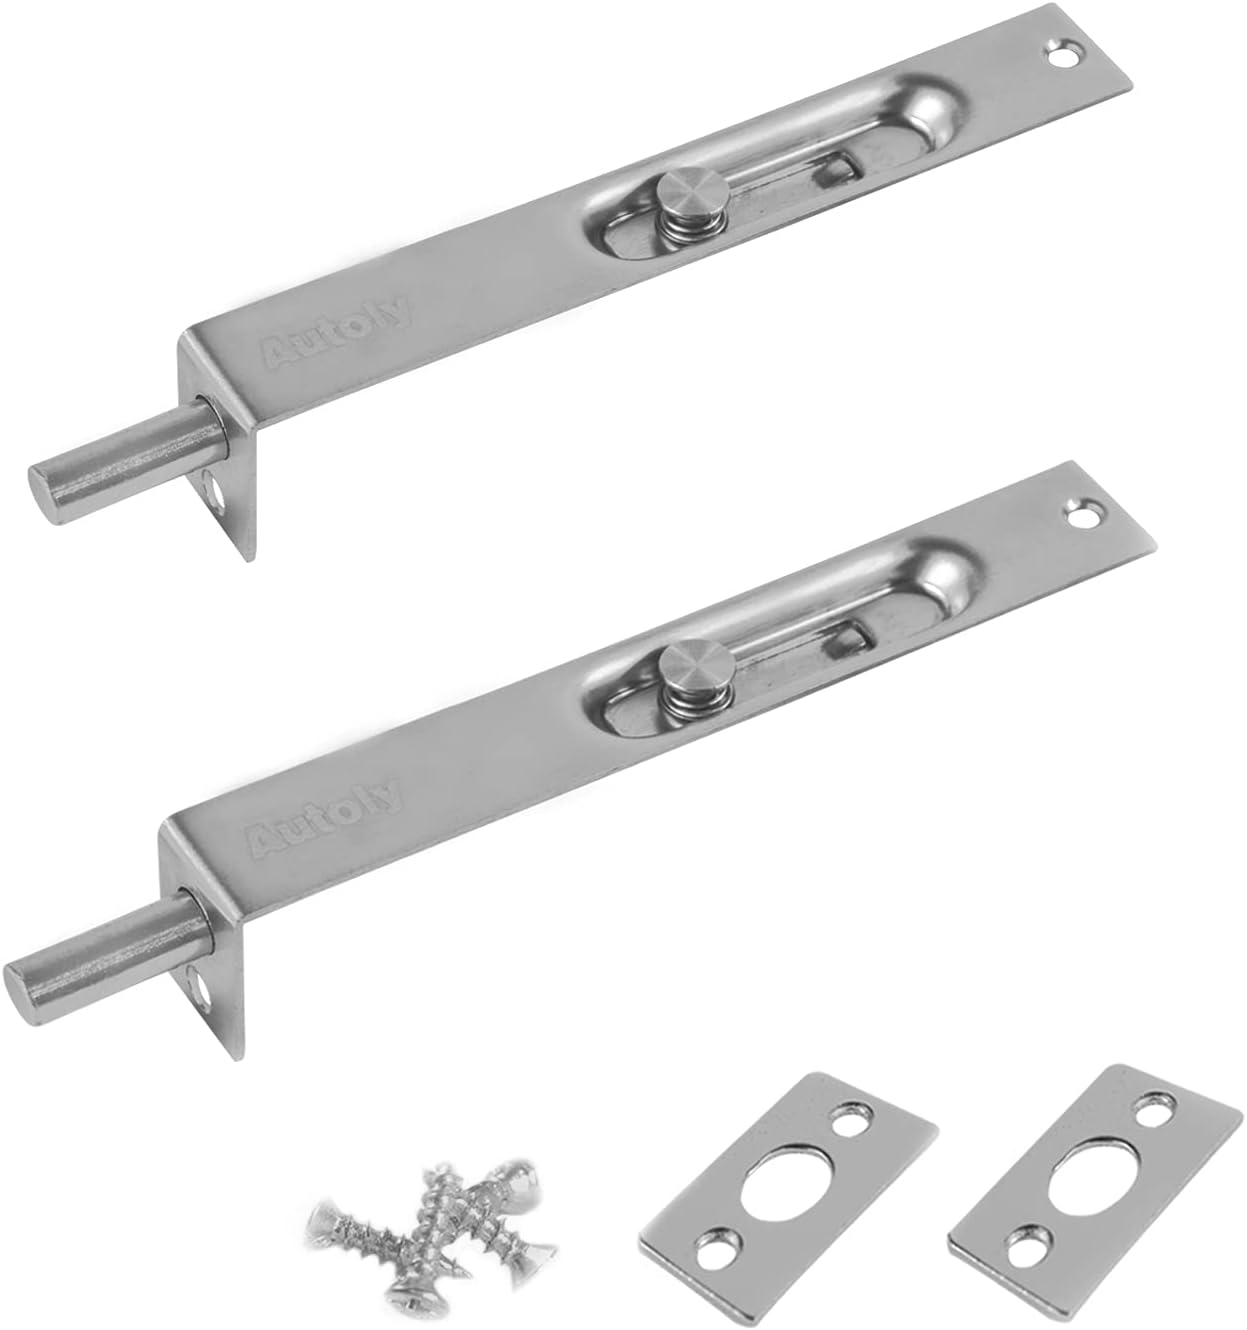 Autoly 2Pcs 6 Inch French Door Lock,Stainless Steel Concealed Slide Lock Bolt Lever Action Latch with Screws,for Doors and Windows,Fre